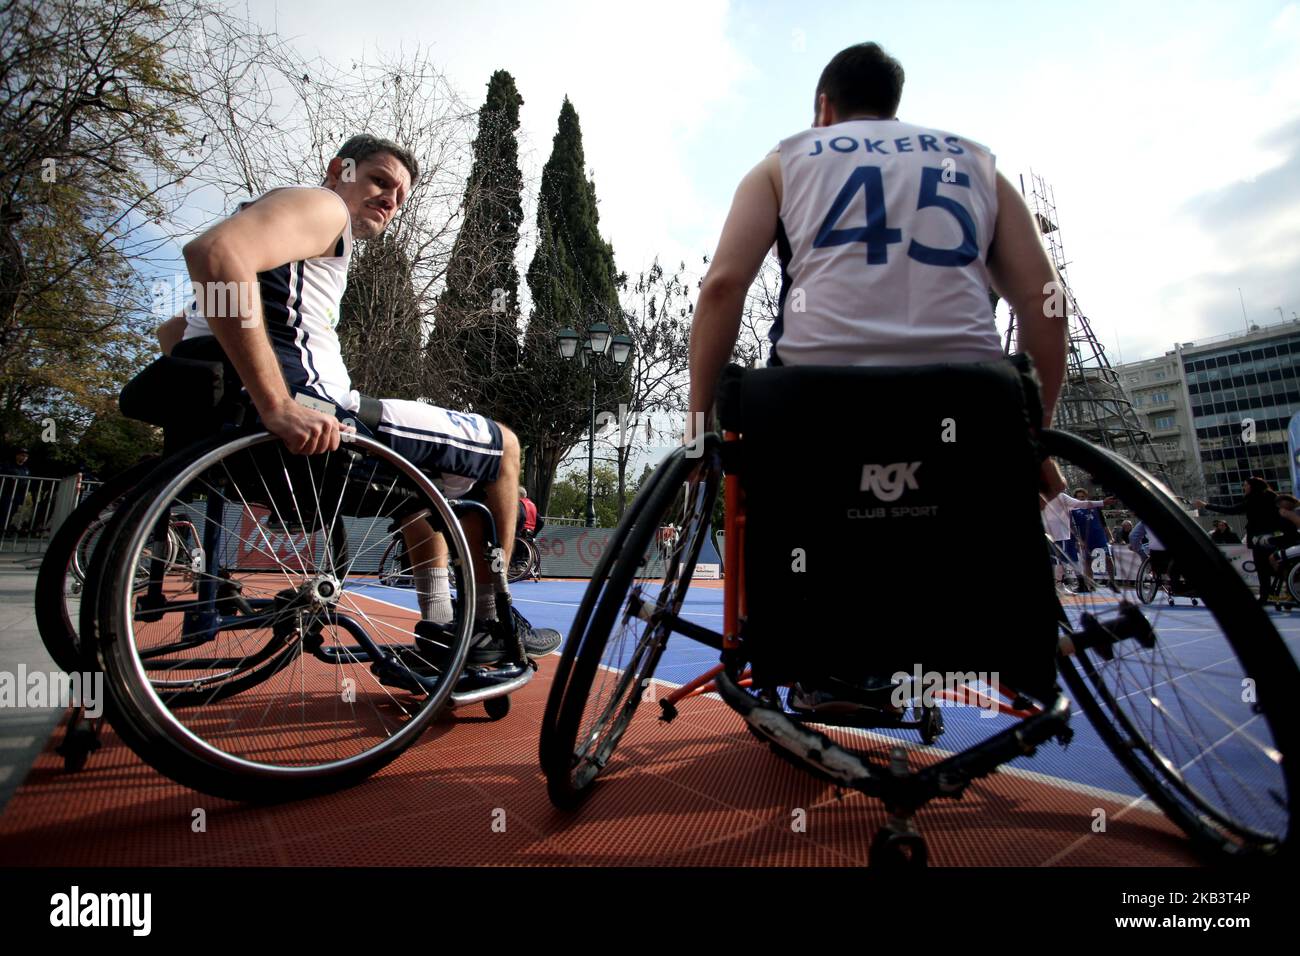 Wheelchair Basketball at Syntagma Square in Athens, Greece on December 3, 2018 on the occasion of the International Day for Persons with Disabilities. The unprofessional tournament was organised by the Hellenic Wheelchair Basketball Federation and gave people not physically disabled the opportunity to try the wheelchair and play basketball. (Photo by Giorgos Georgiou/NurPhoto) Stock Photo